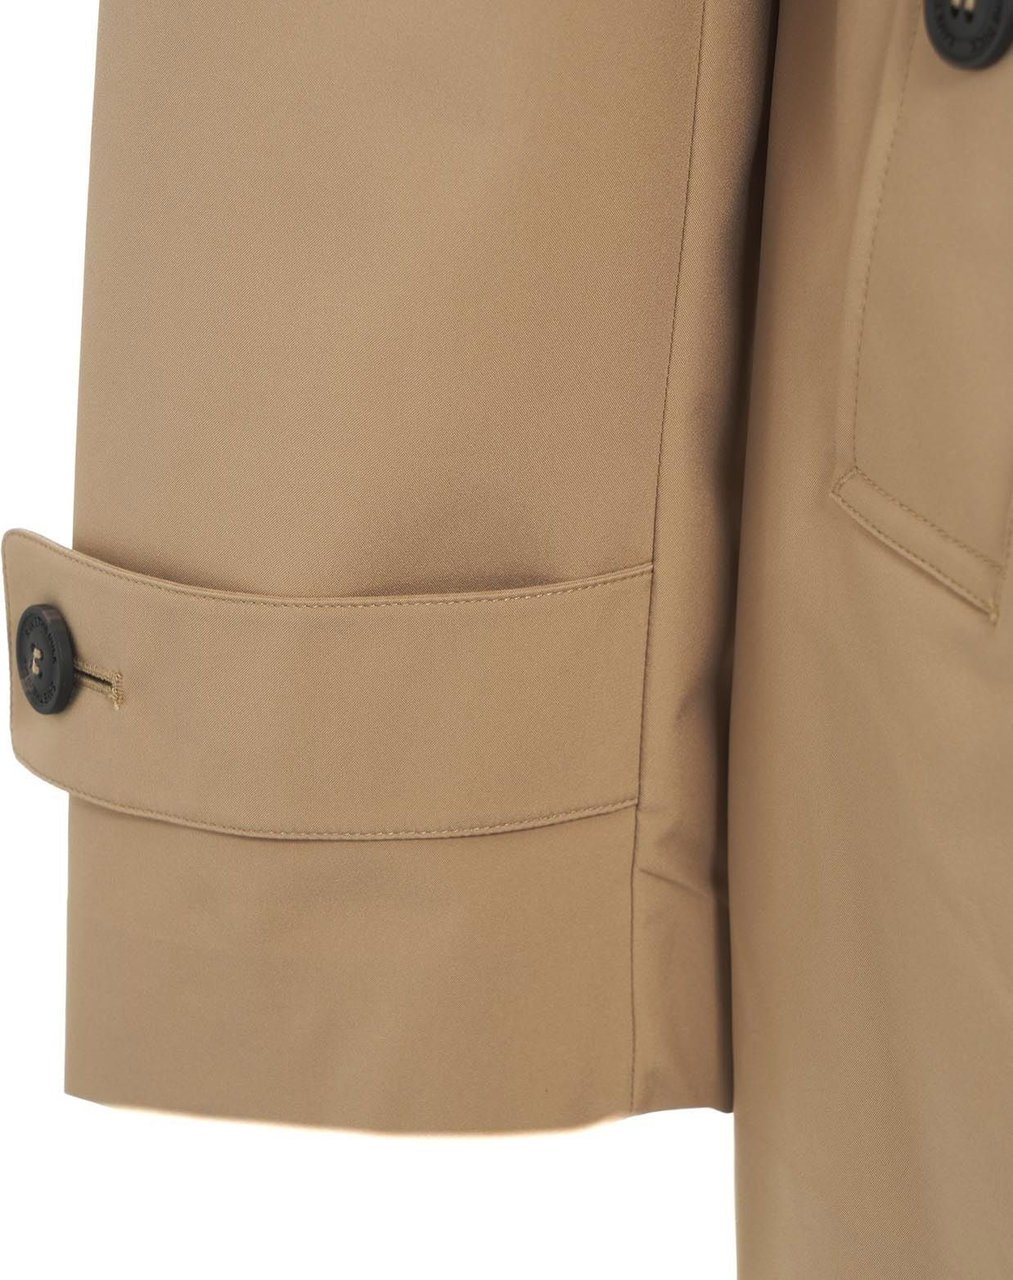 Save the Duck Double-breasted coat "Sofi" Beige